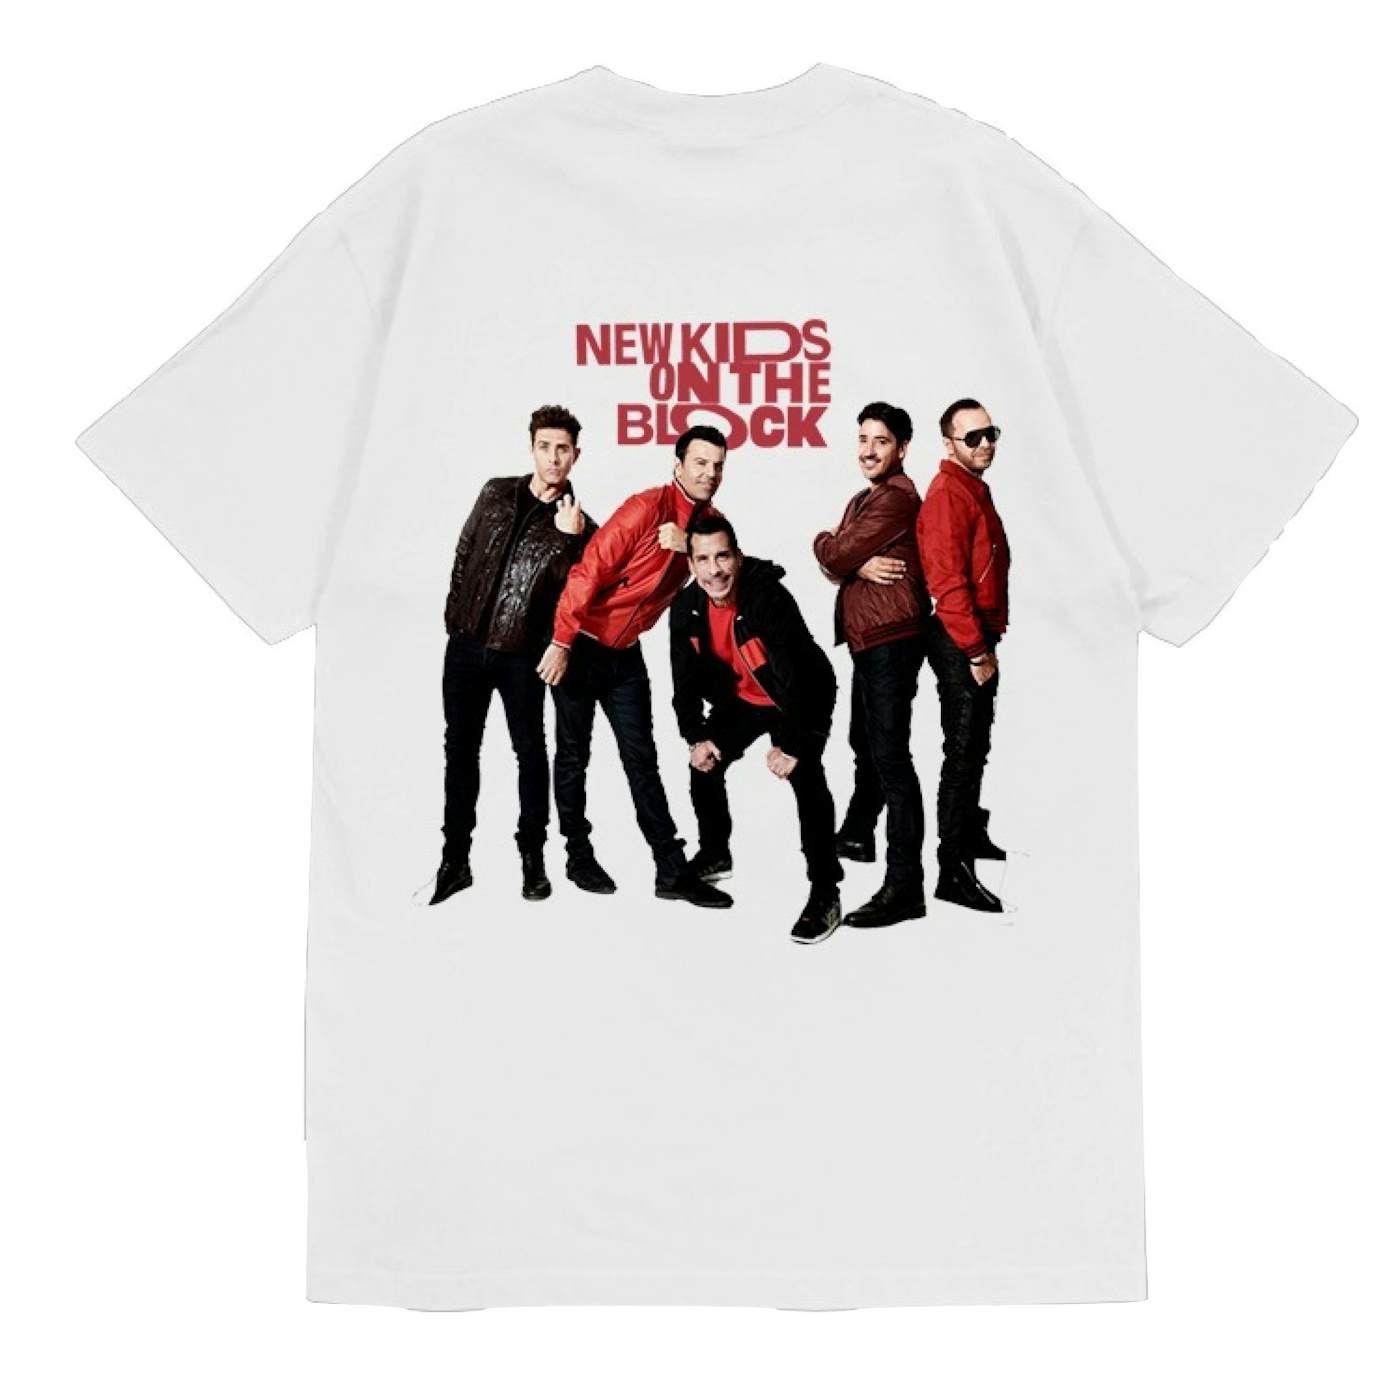 New Kids On The Block NKOTB Then and Now Tee